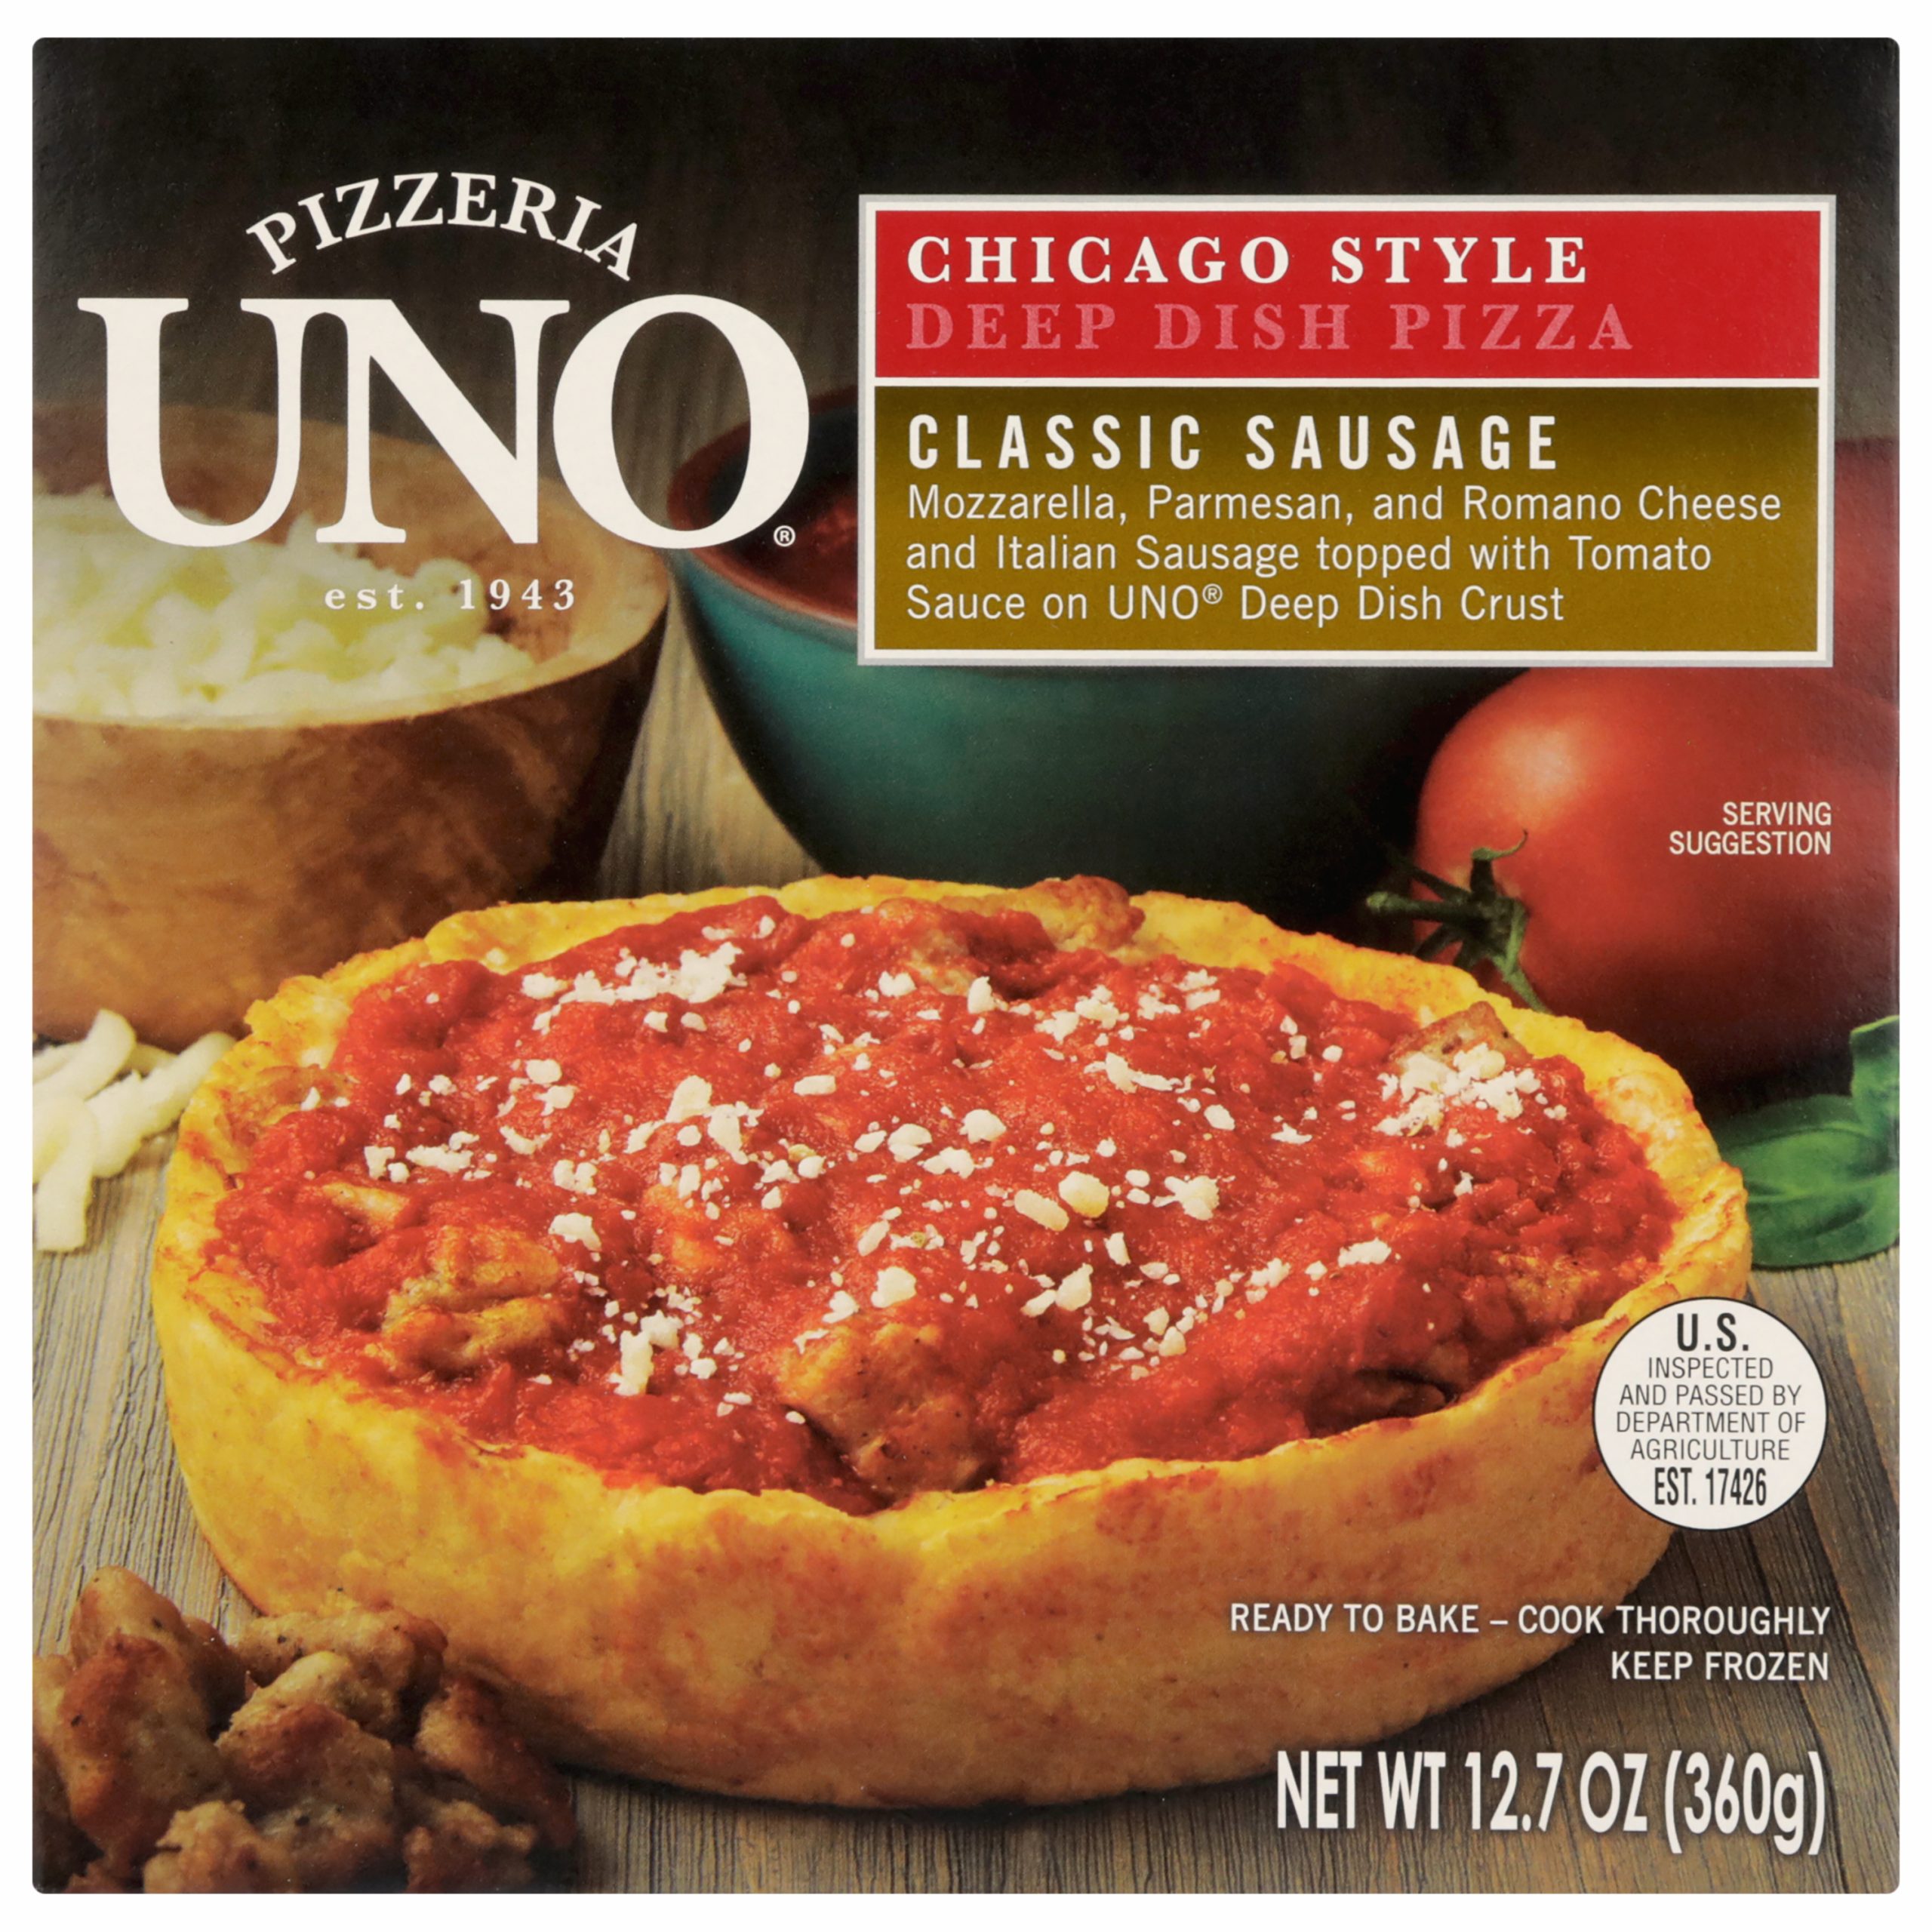 6″ Chicago Style Deep Dish Sausage Pizza